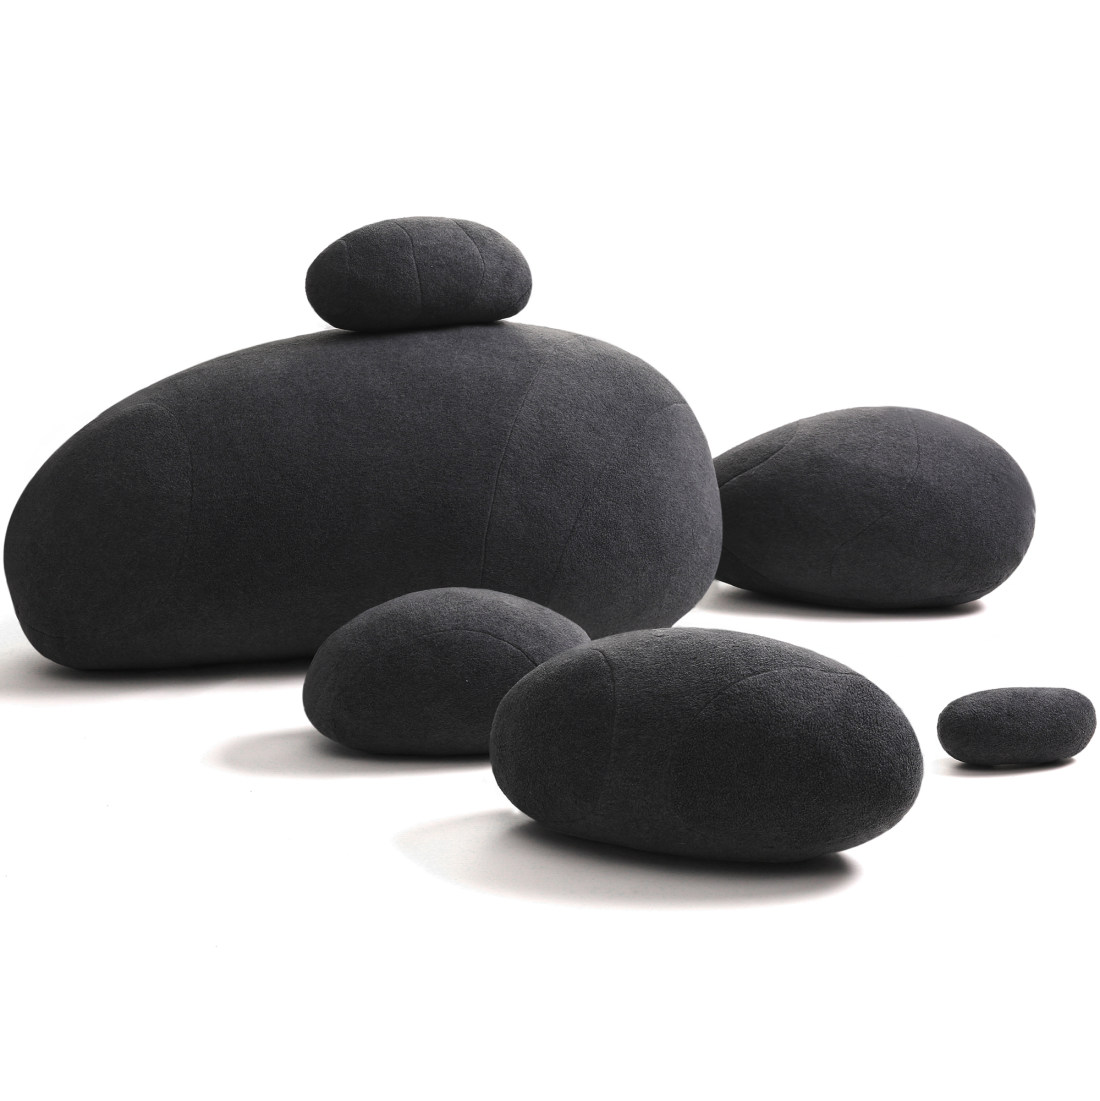 Living Stone Pillows, Pillows That Look Like Stones, Rock Pillows ...